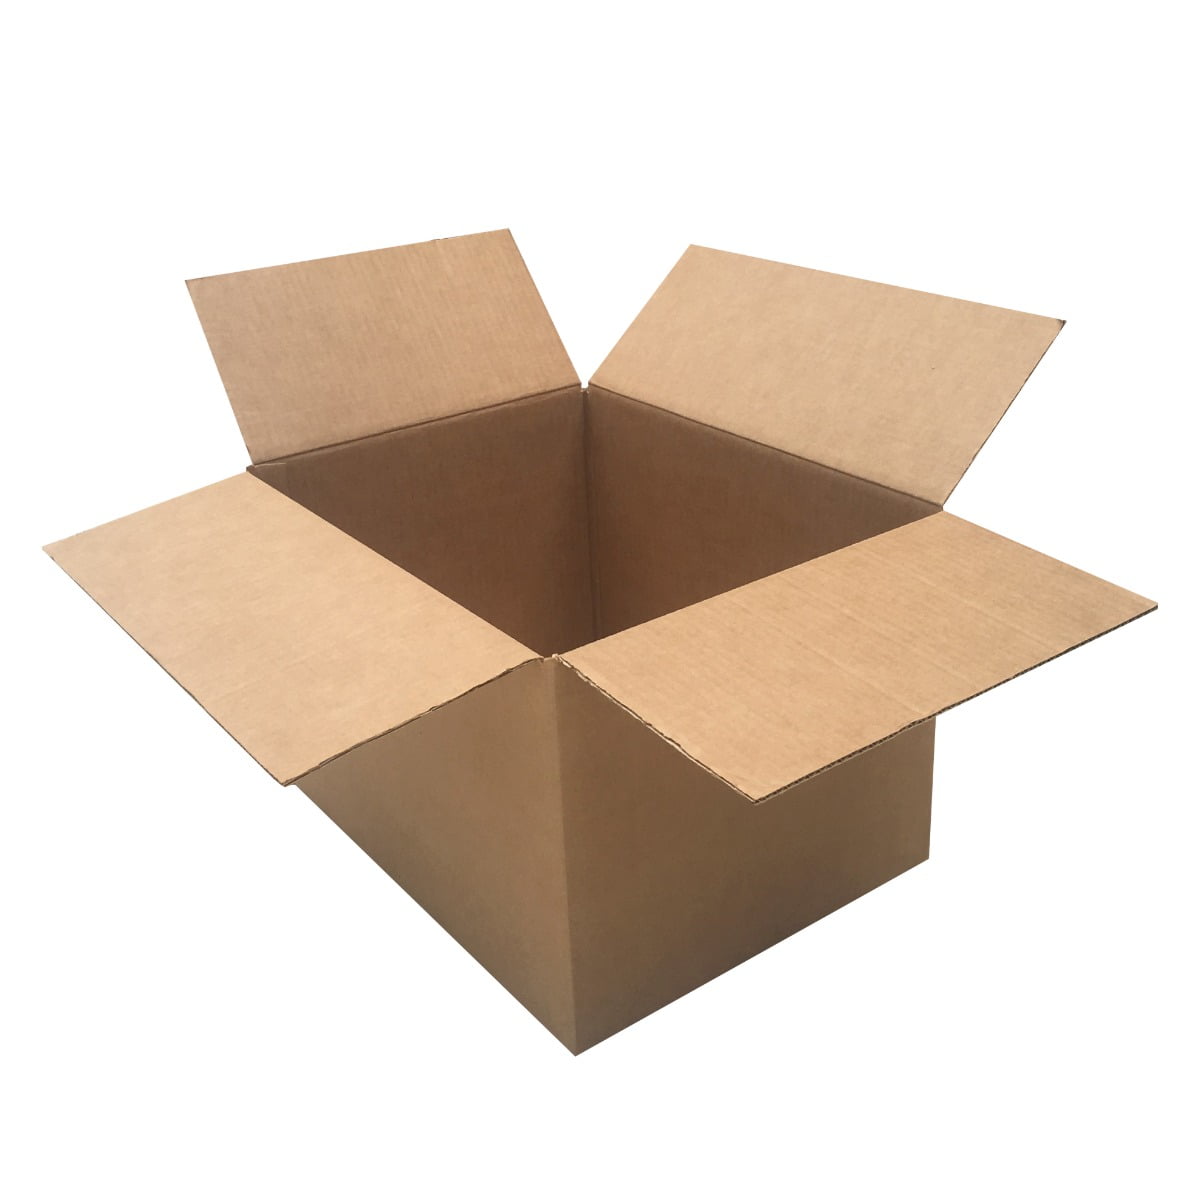 Details about    5 Medium Moving Boxes 20x14x10 Packing Cardboard Pack of 5ct 20 x 14 x 10